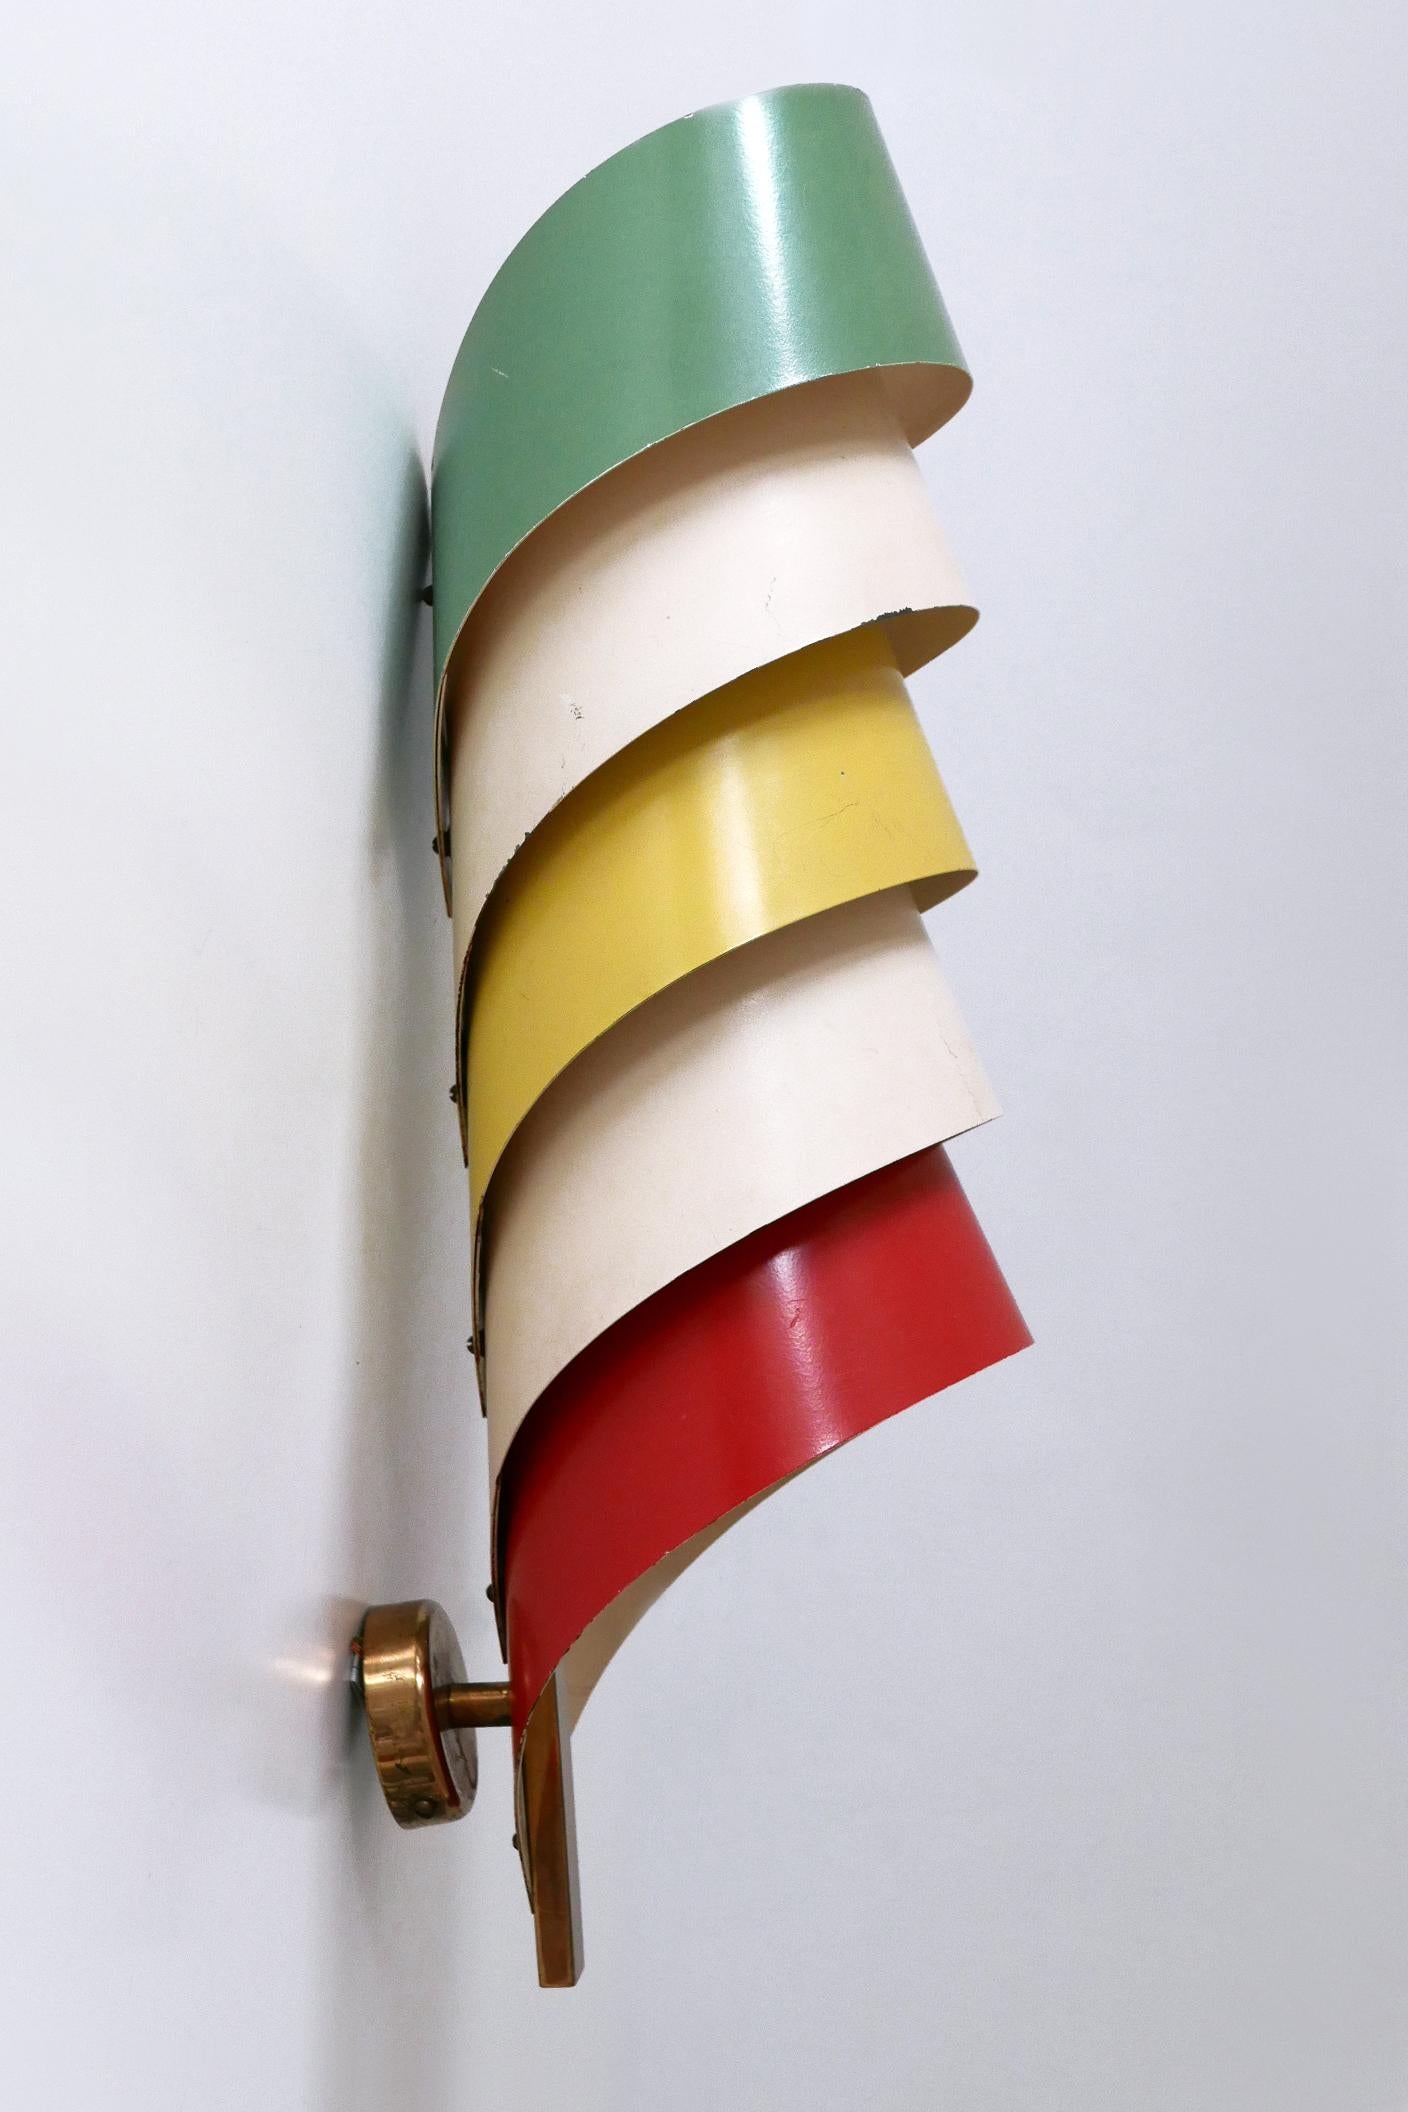 Metal Rare & Decorative Mid-Century Modern Sconce or Wall Lamp Scandinavia 1950s For Sale